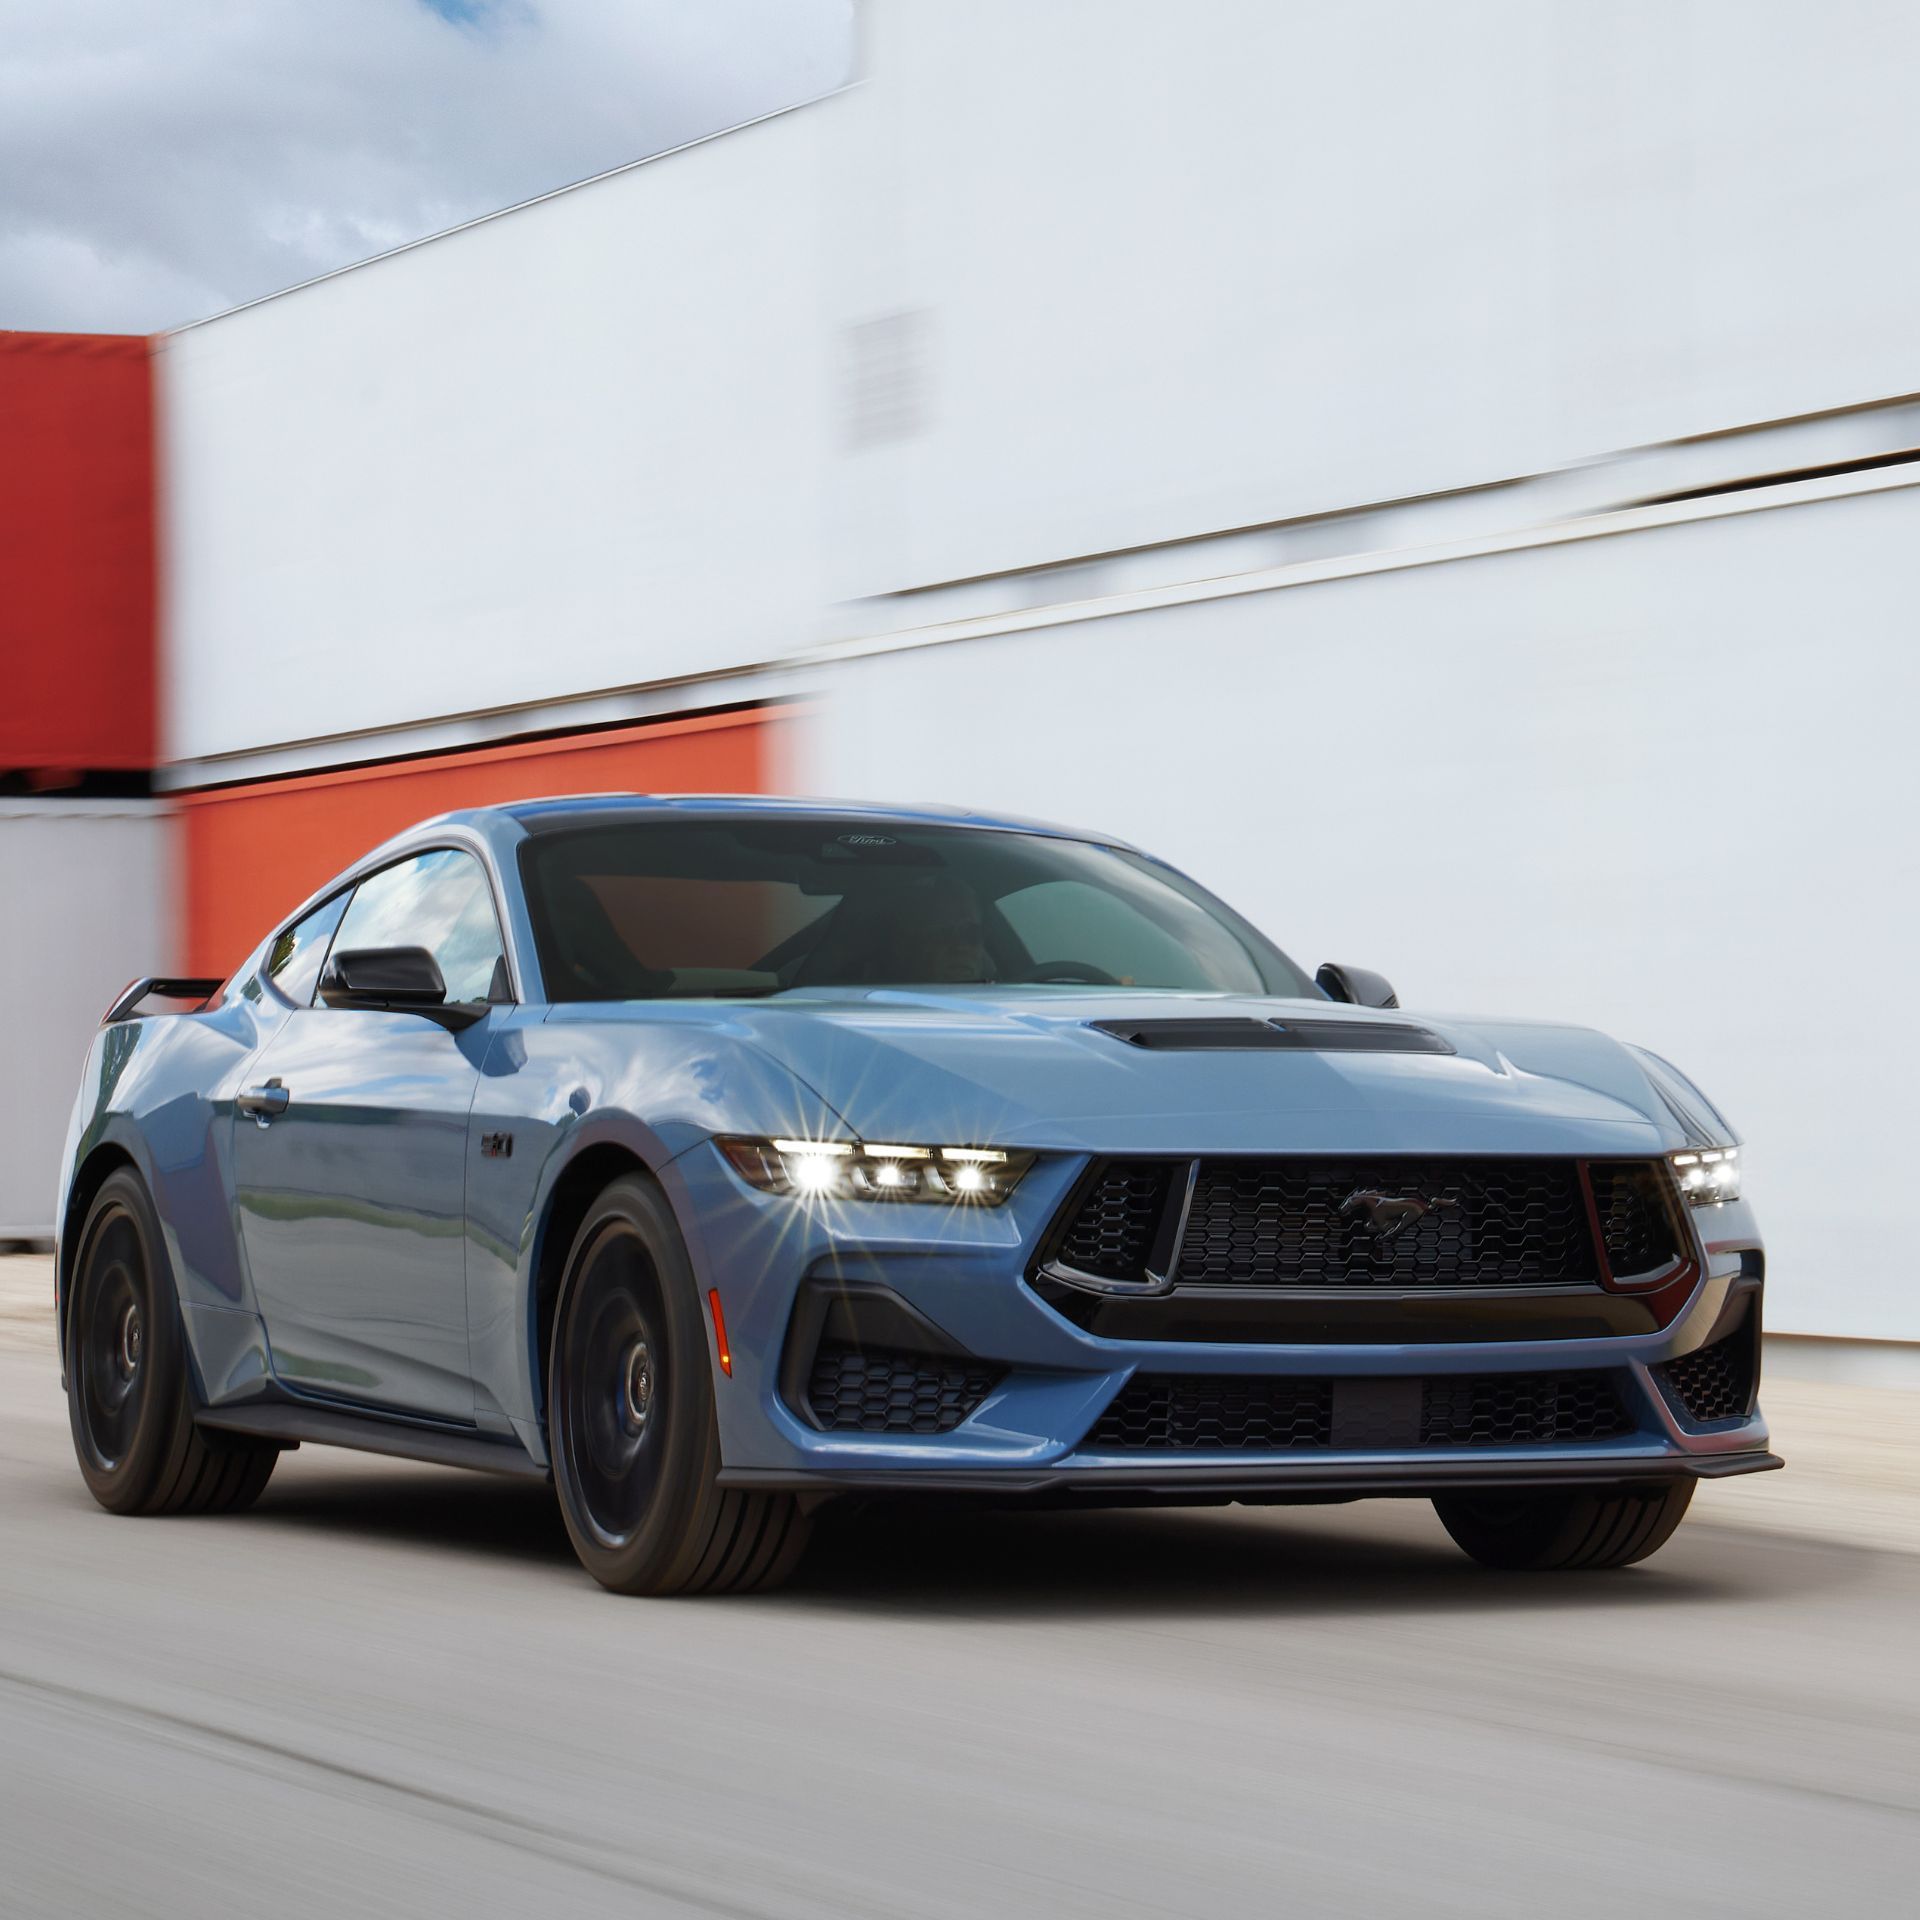 2024 Ford Mustang Vs 2024 Chevrolet Camaro Differences Compared